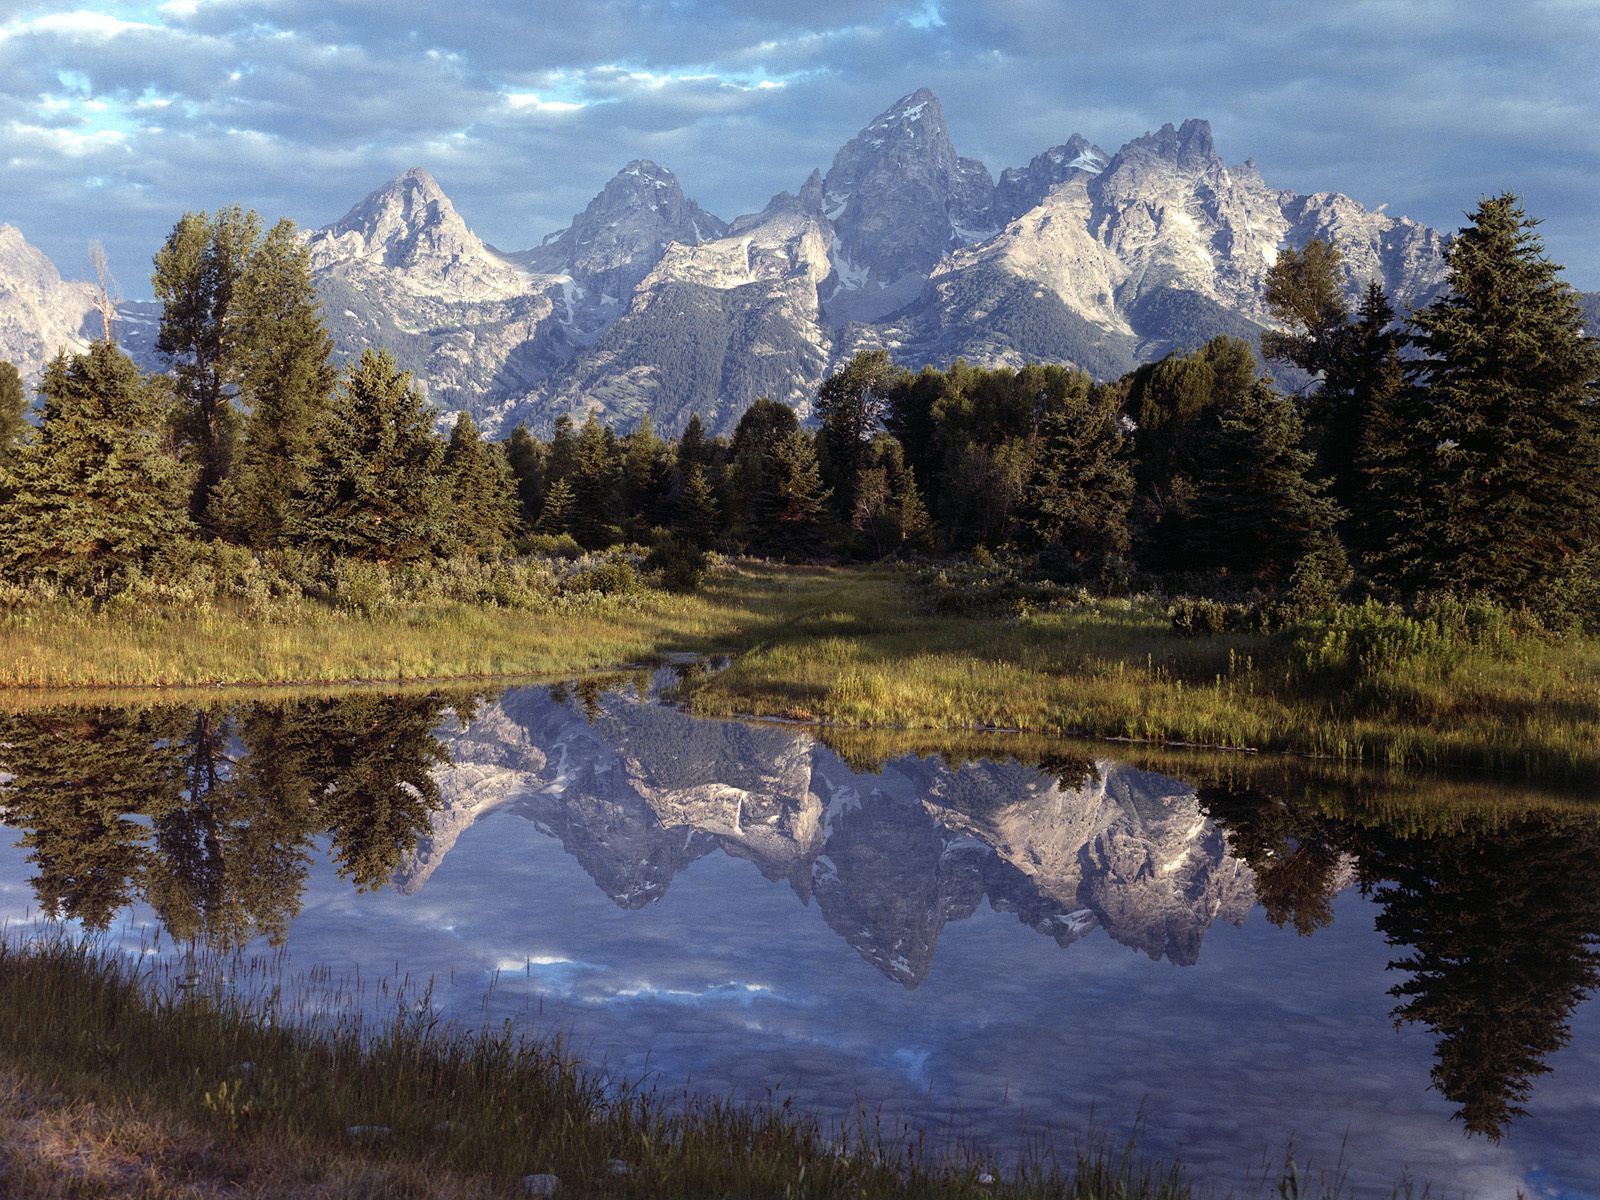 Jackson Hole, Wyoming is the “Crown Jewel” of the northern Rocky